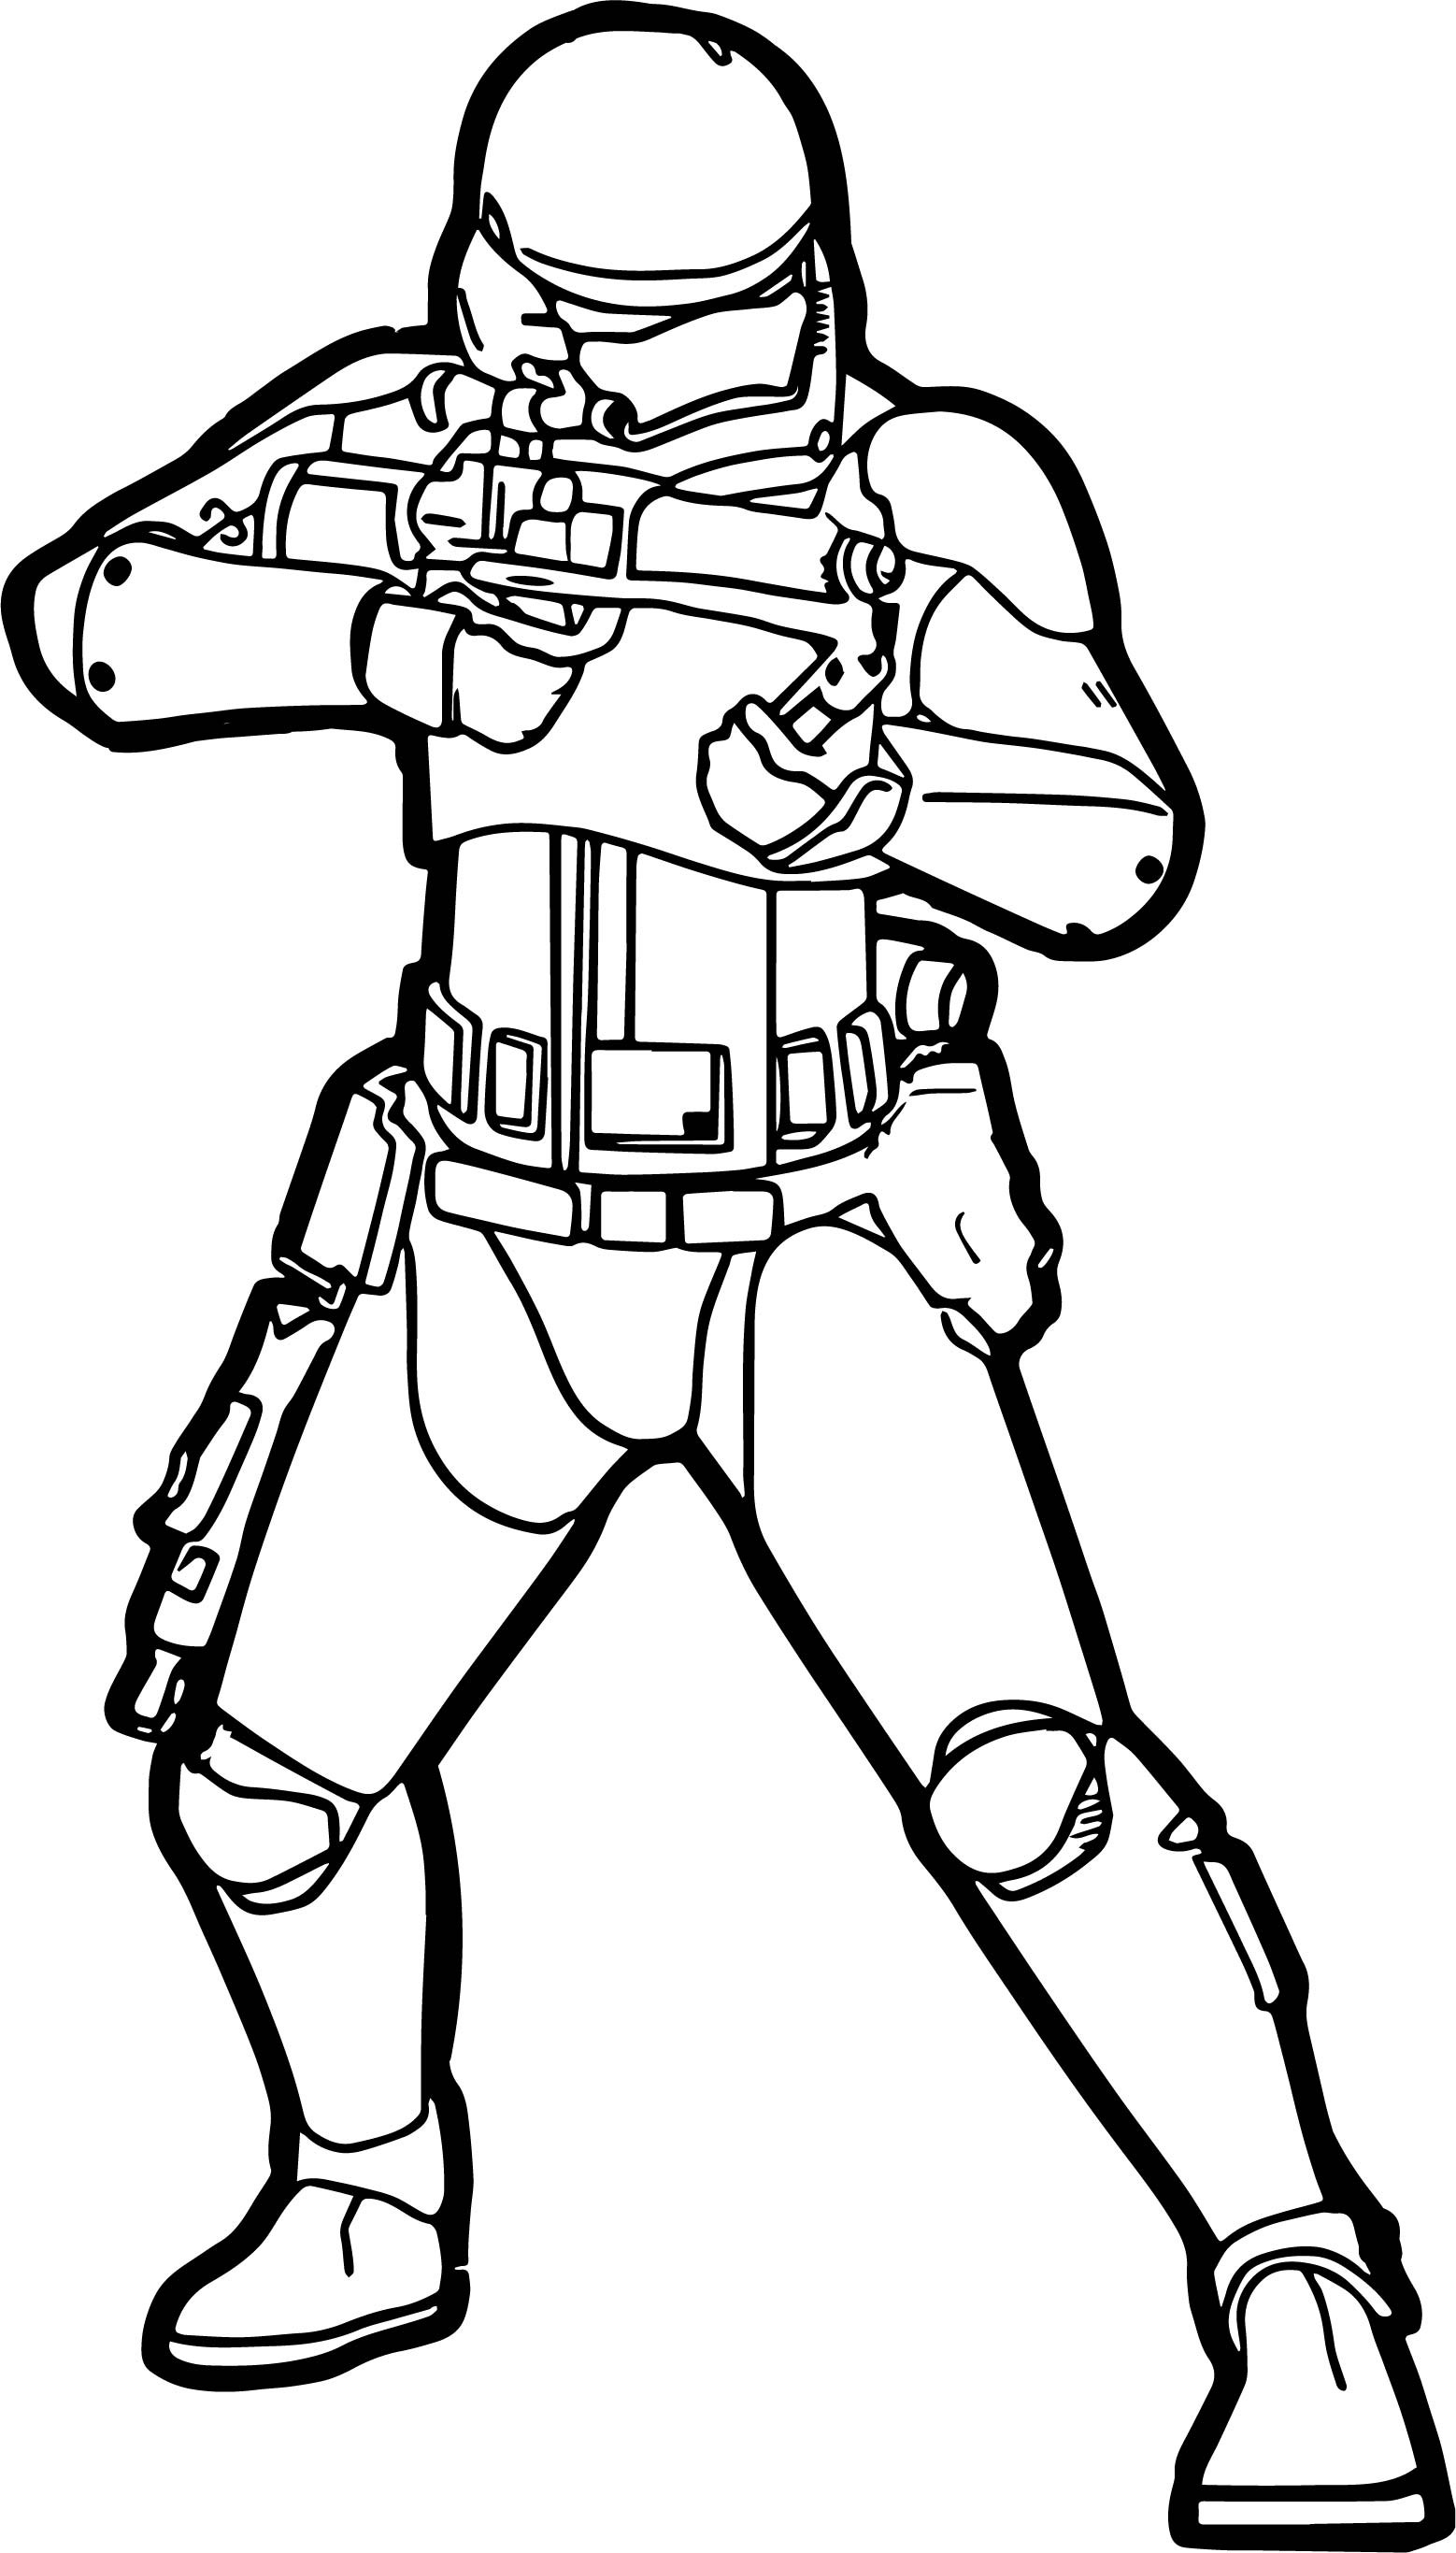 Storm Trooper Coloring Pages
 Star Wars The Force Awakens Stormtrooper Coloring Page